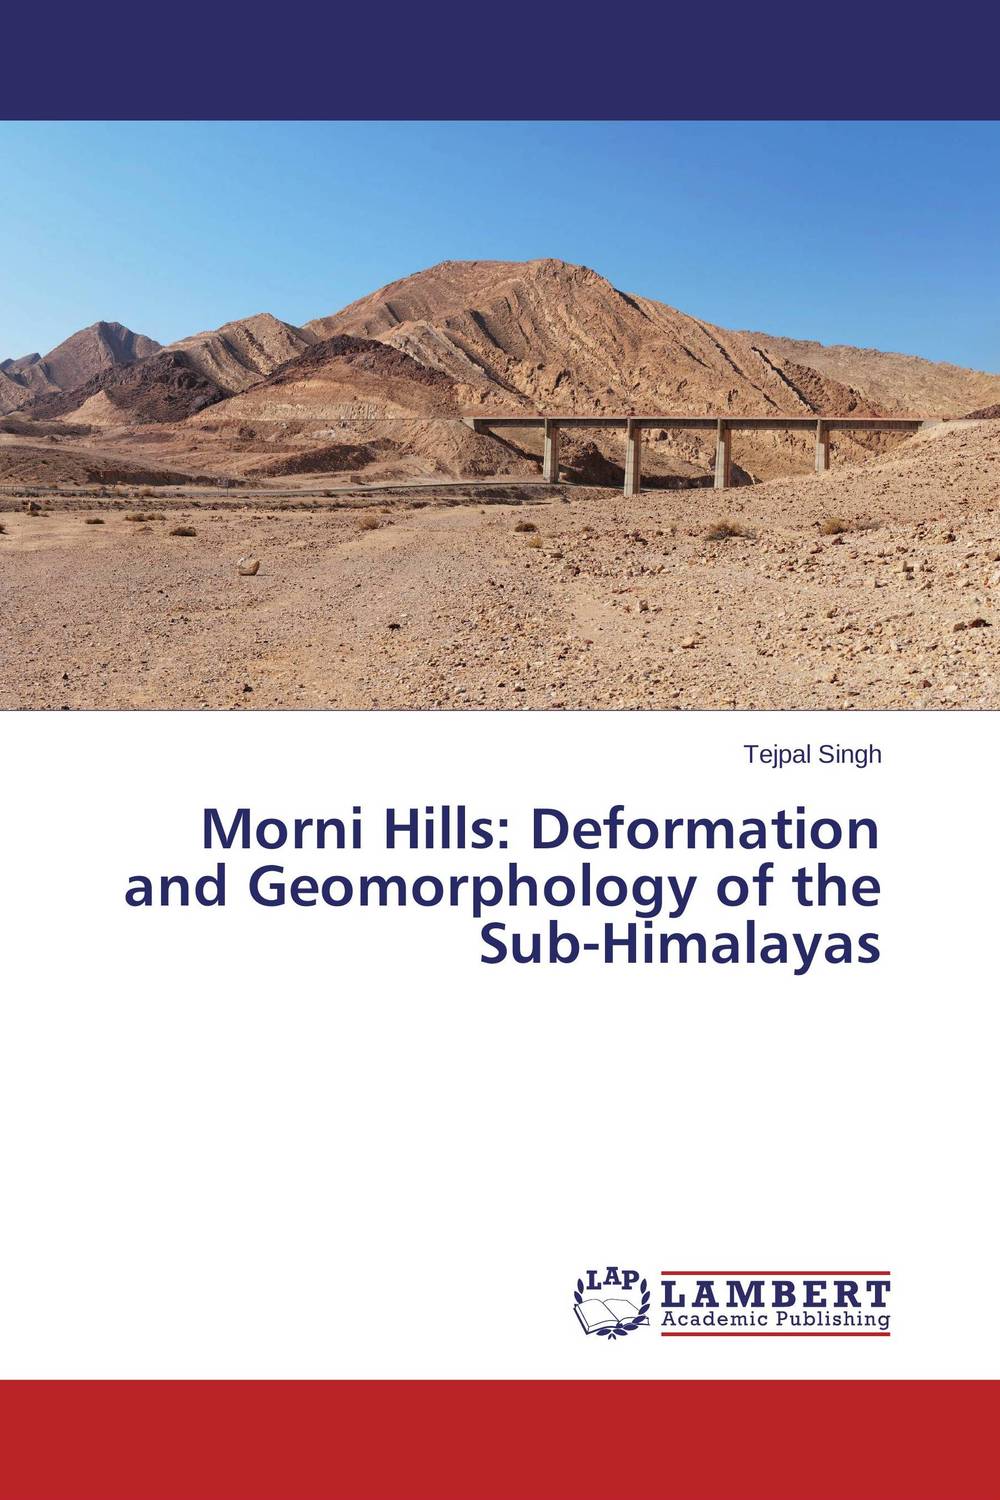 Morni Hills: Deformation and Geomorphology of the Sub-Himalayas